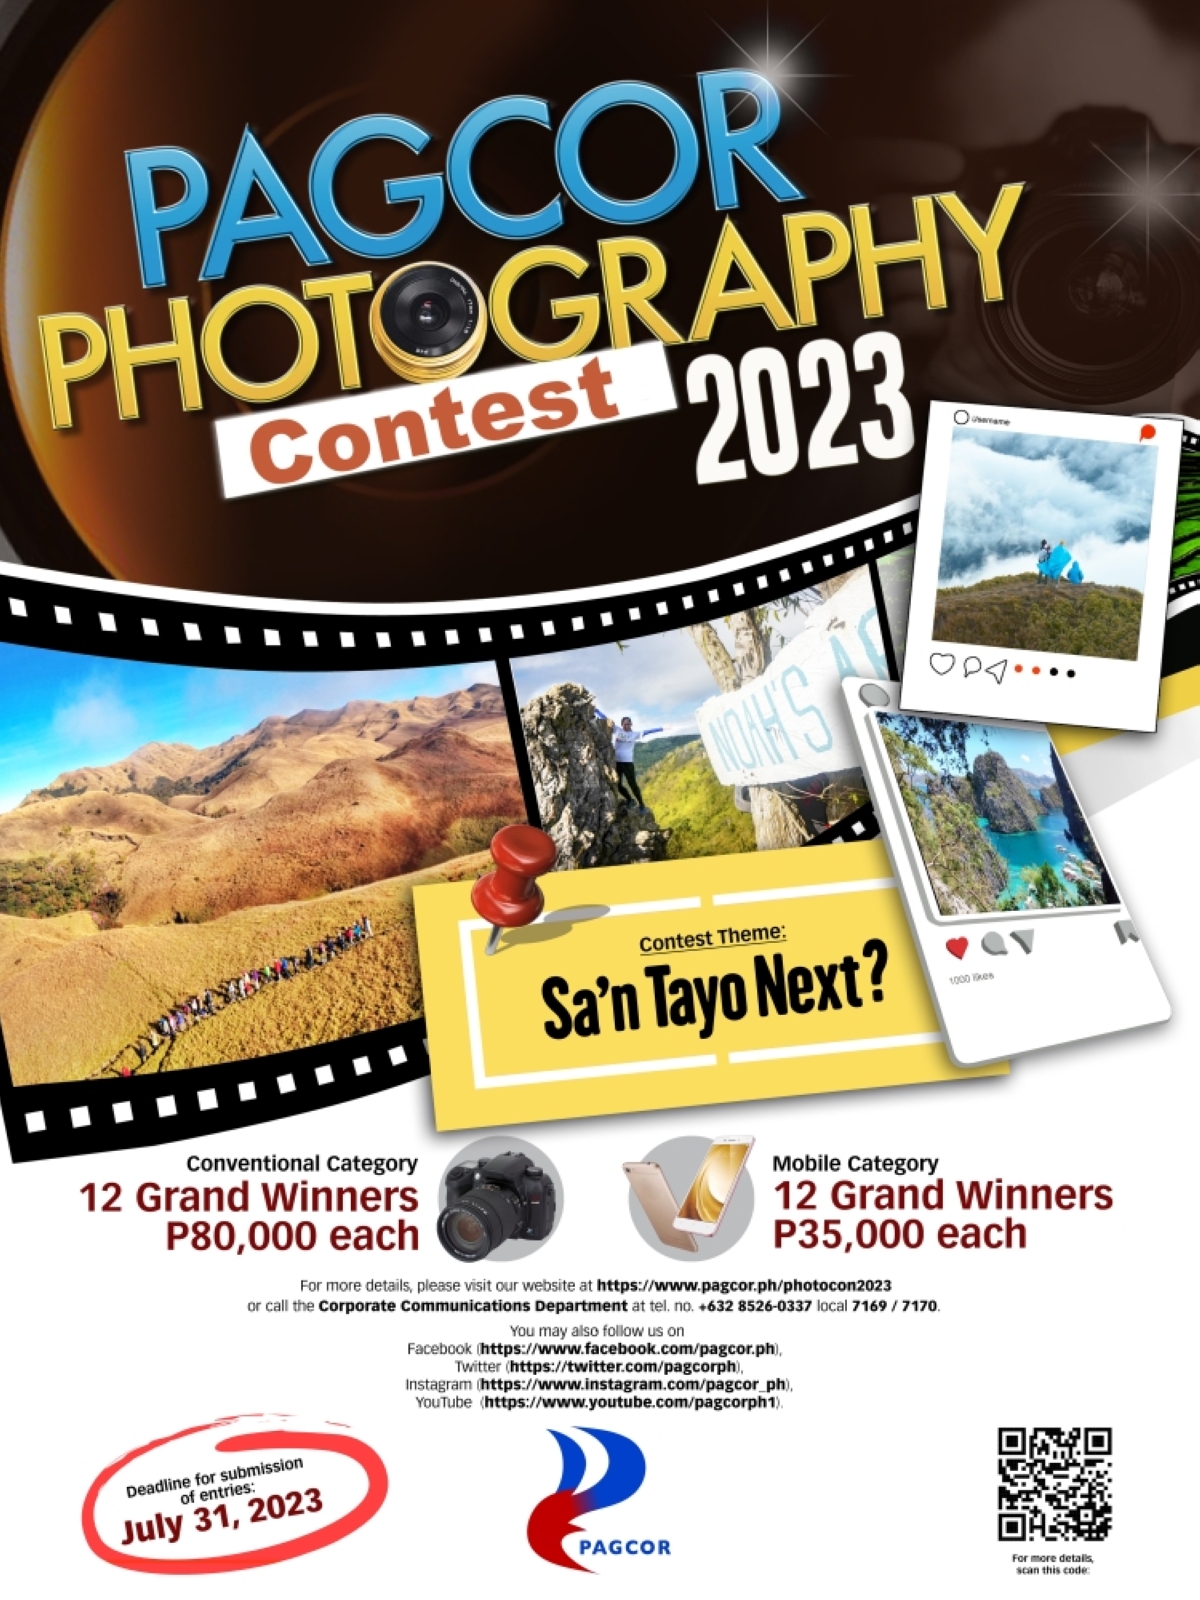 For more information about the Pagcor Photography Contest 2023, visit www.pagcor.ph or follow Pagcor’s Facebook page. CONTRIBUTED PHOTO